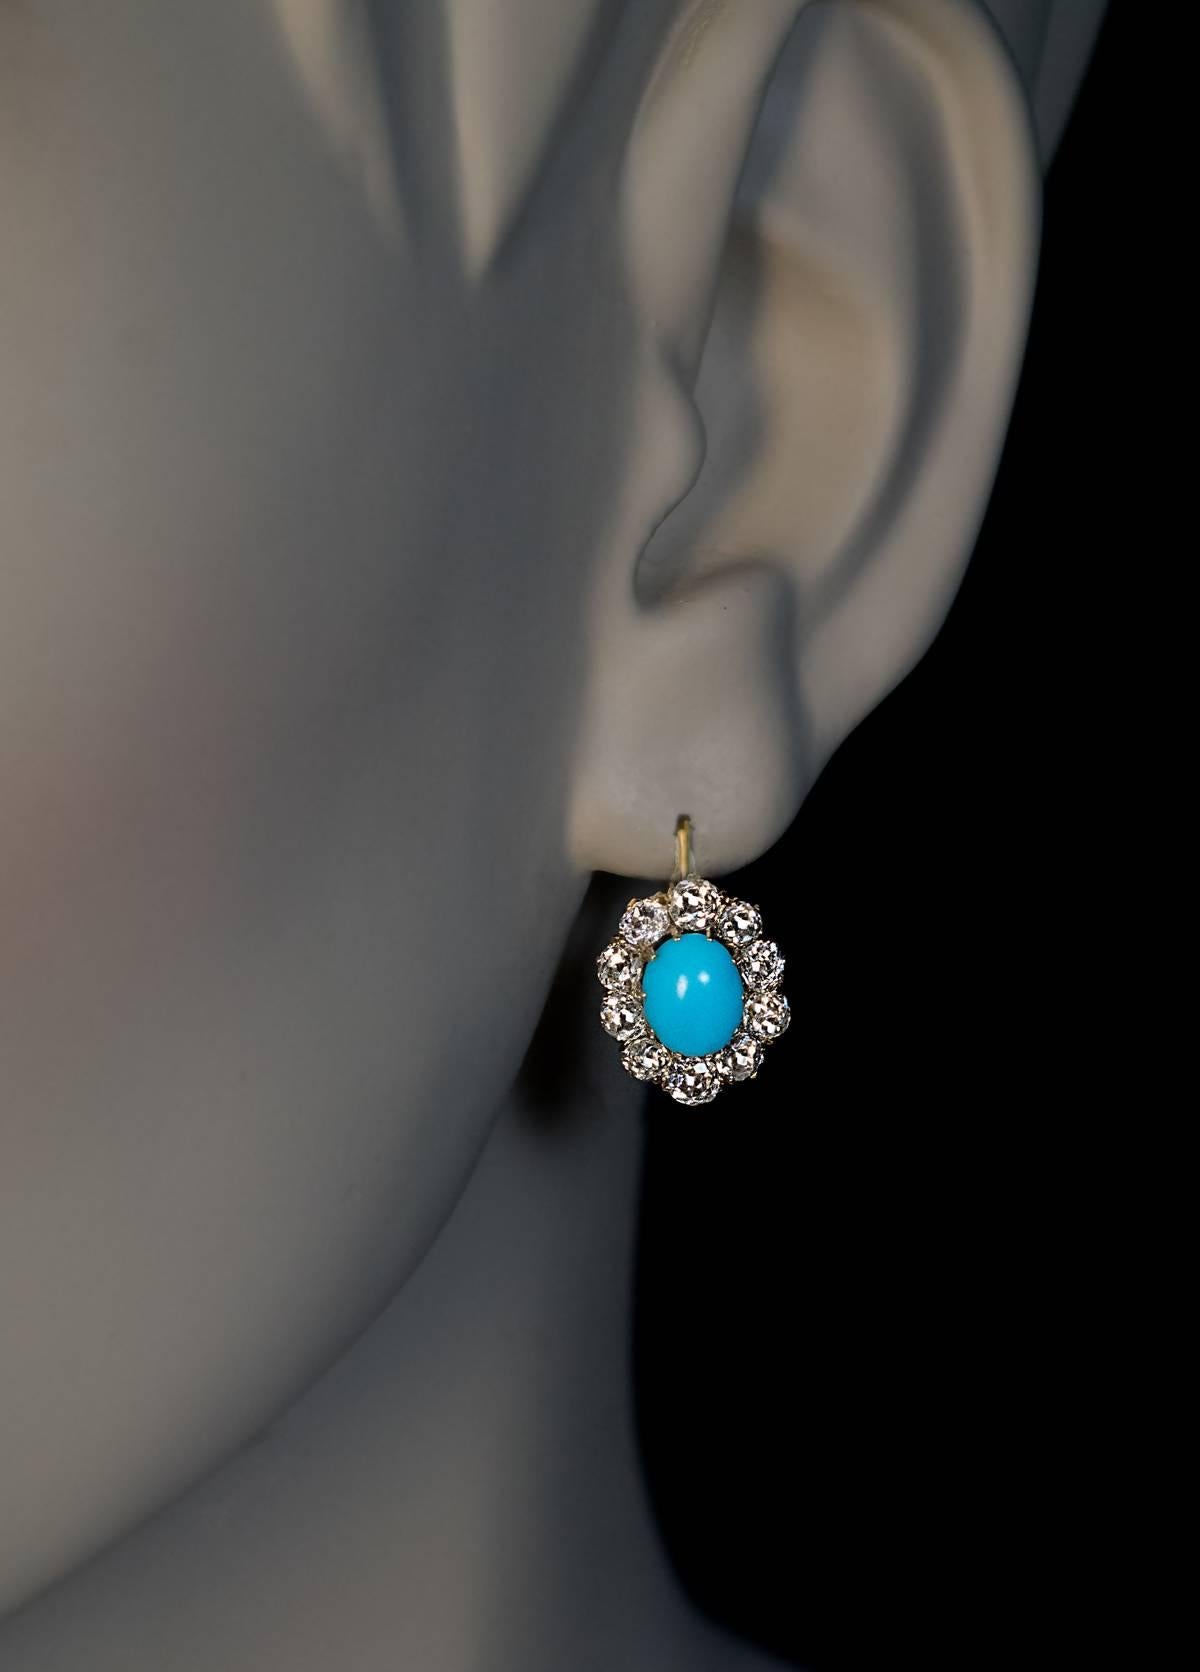 Circa 1890

Victorian era antique 14K gold cluster earrings are centered with oval sky blue cabochon turquoise encircled by sparkling bright white old mine cut diamonds (F-G color, VS-SI clarity).

Estimated total diamond weight is 2.60 ct.

The